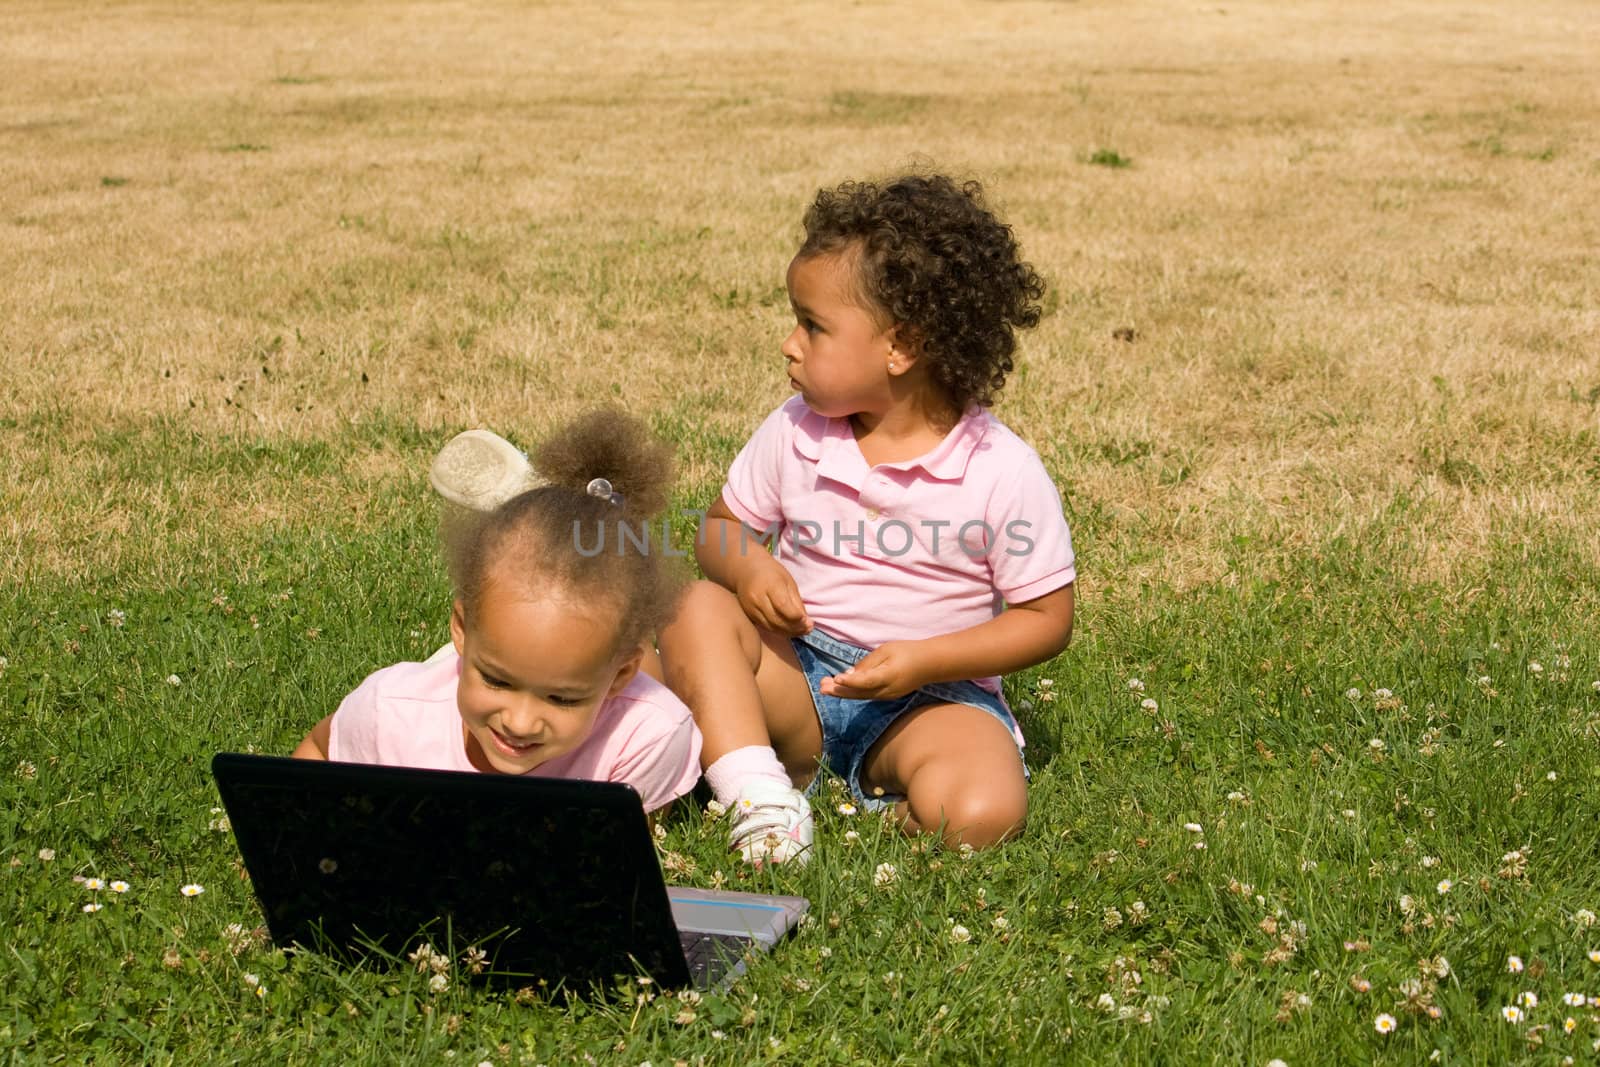 Two Beautiful Ethnic Girls with Laptop Computer in the park on a field of clovers and brown and green grass.